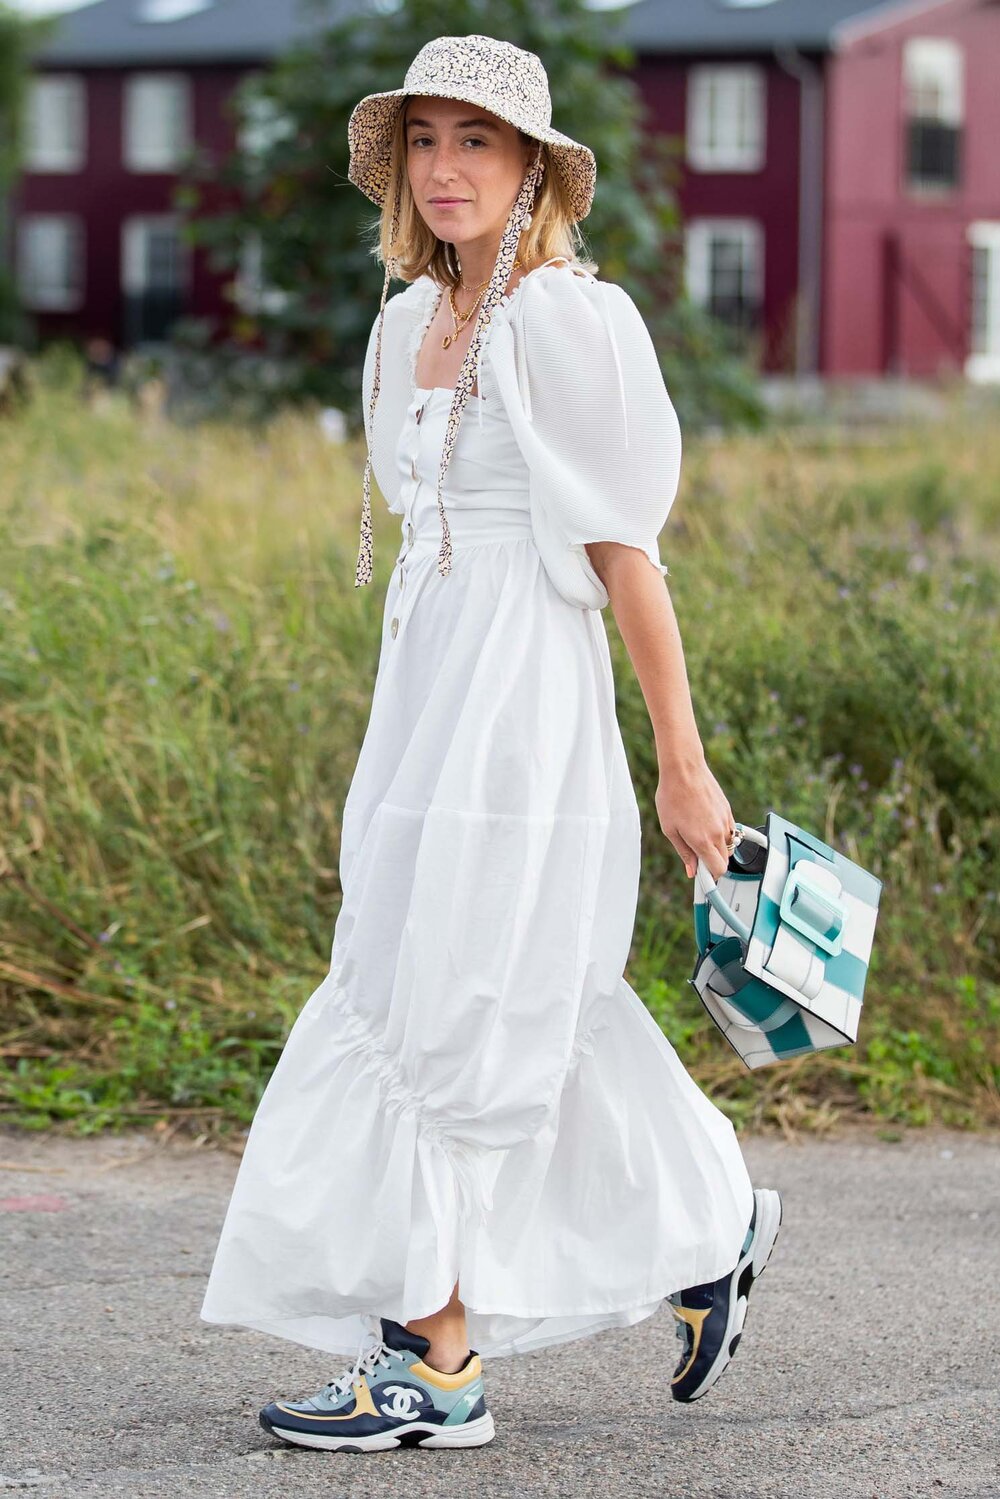 white-dress-maxi-peasant-white-bucket-hat-blonde-lob-green-bag-plaid-necklace-blue-shoe-sneakers-dad-spring-summer-lunch.jpg